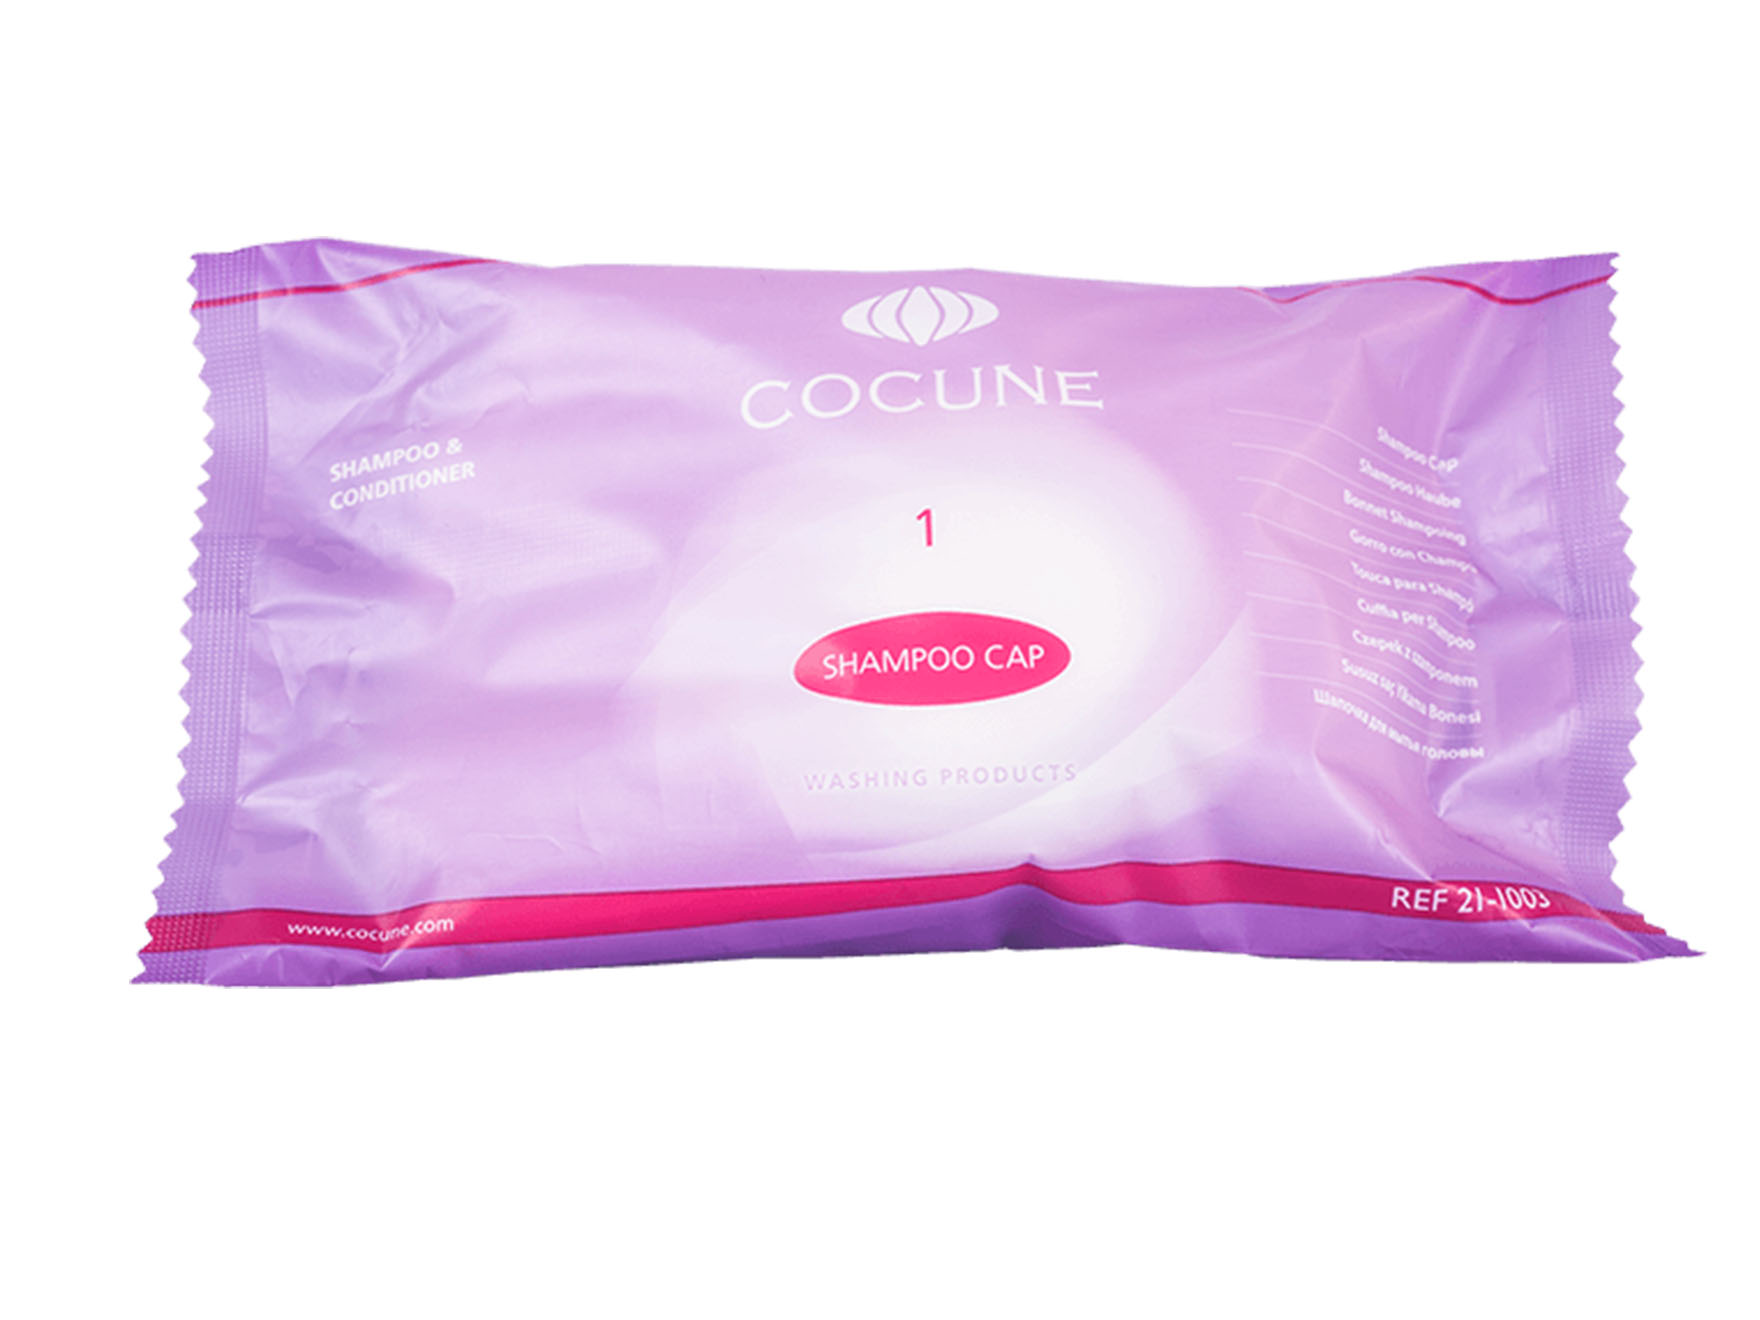 Cocune charlottes shampooing - 1 x 52 pcs